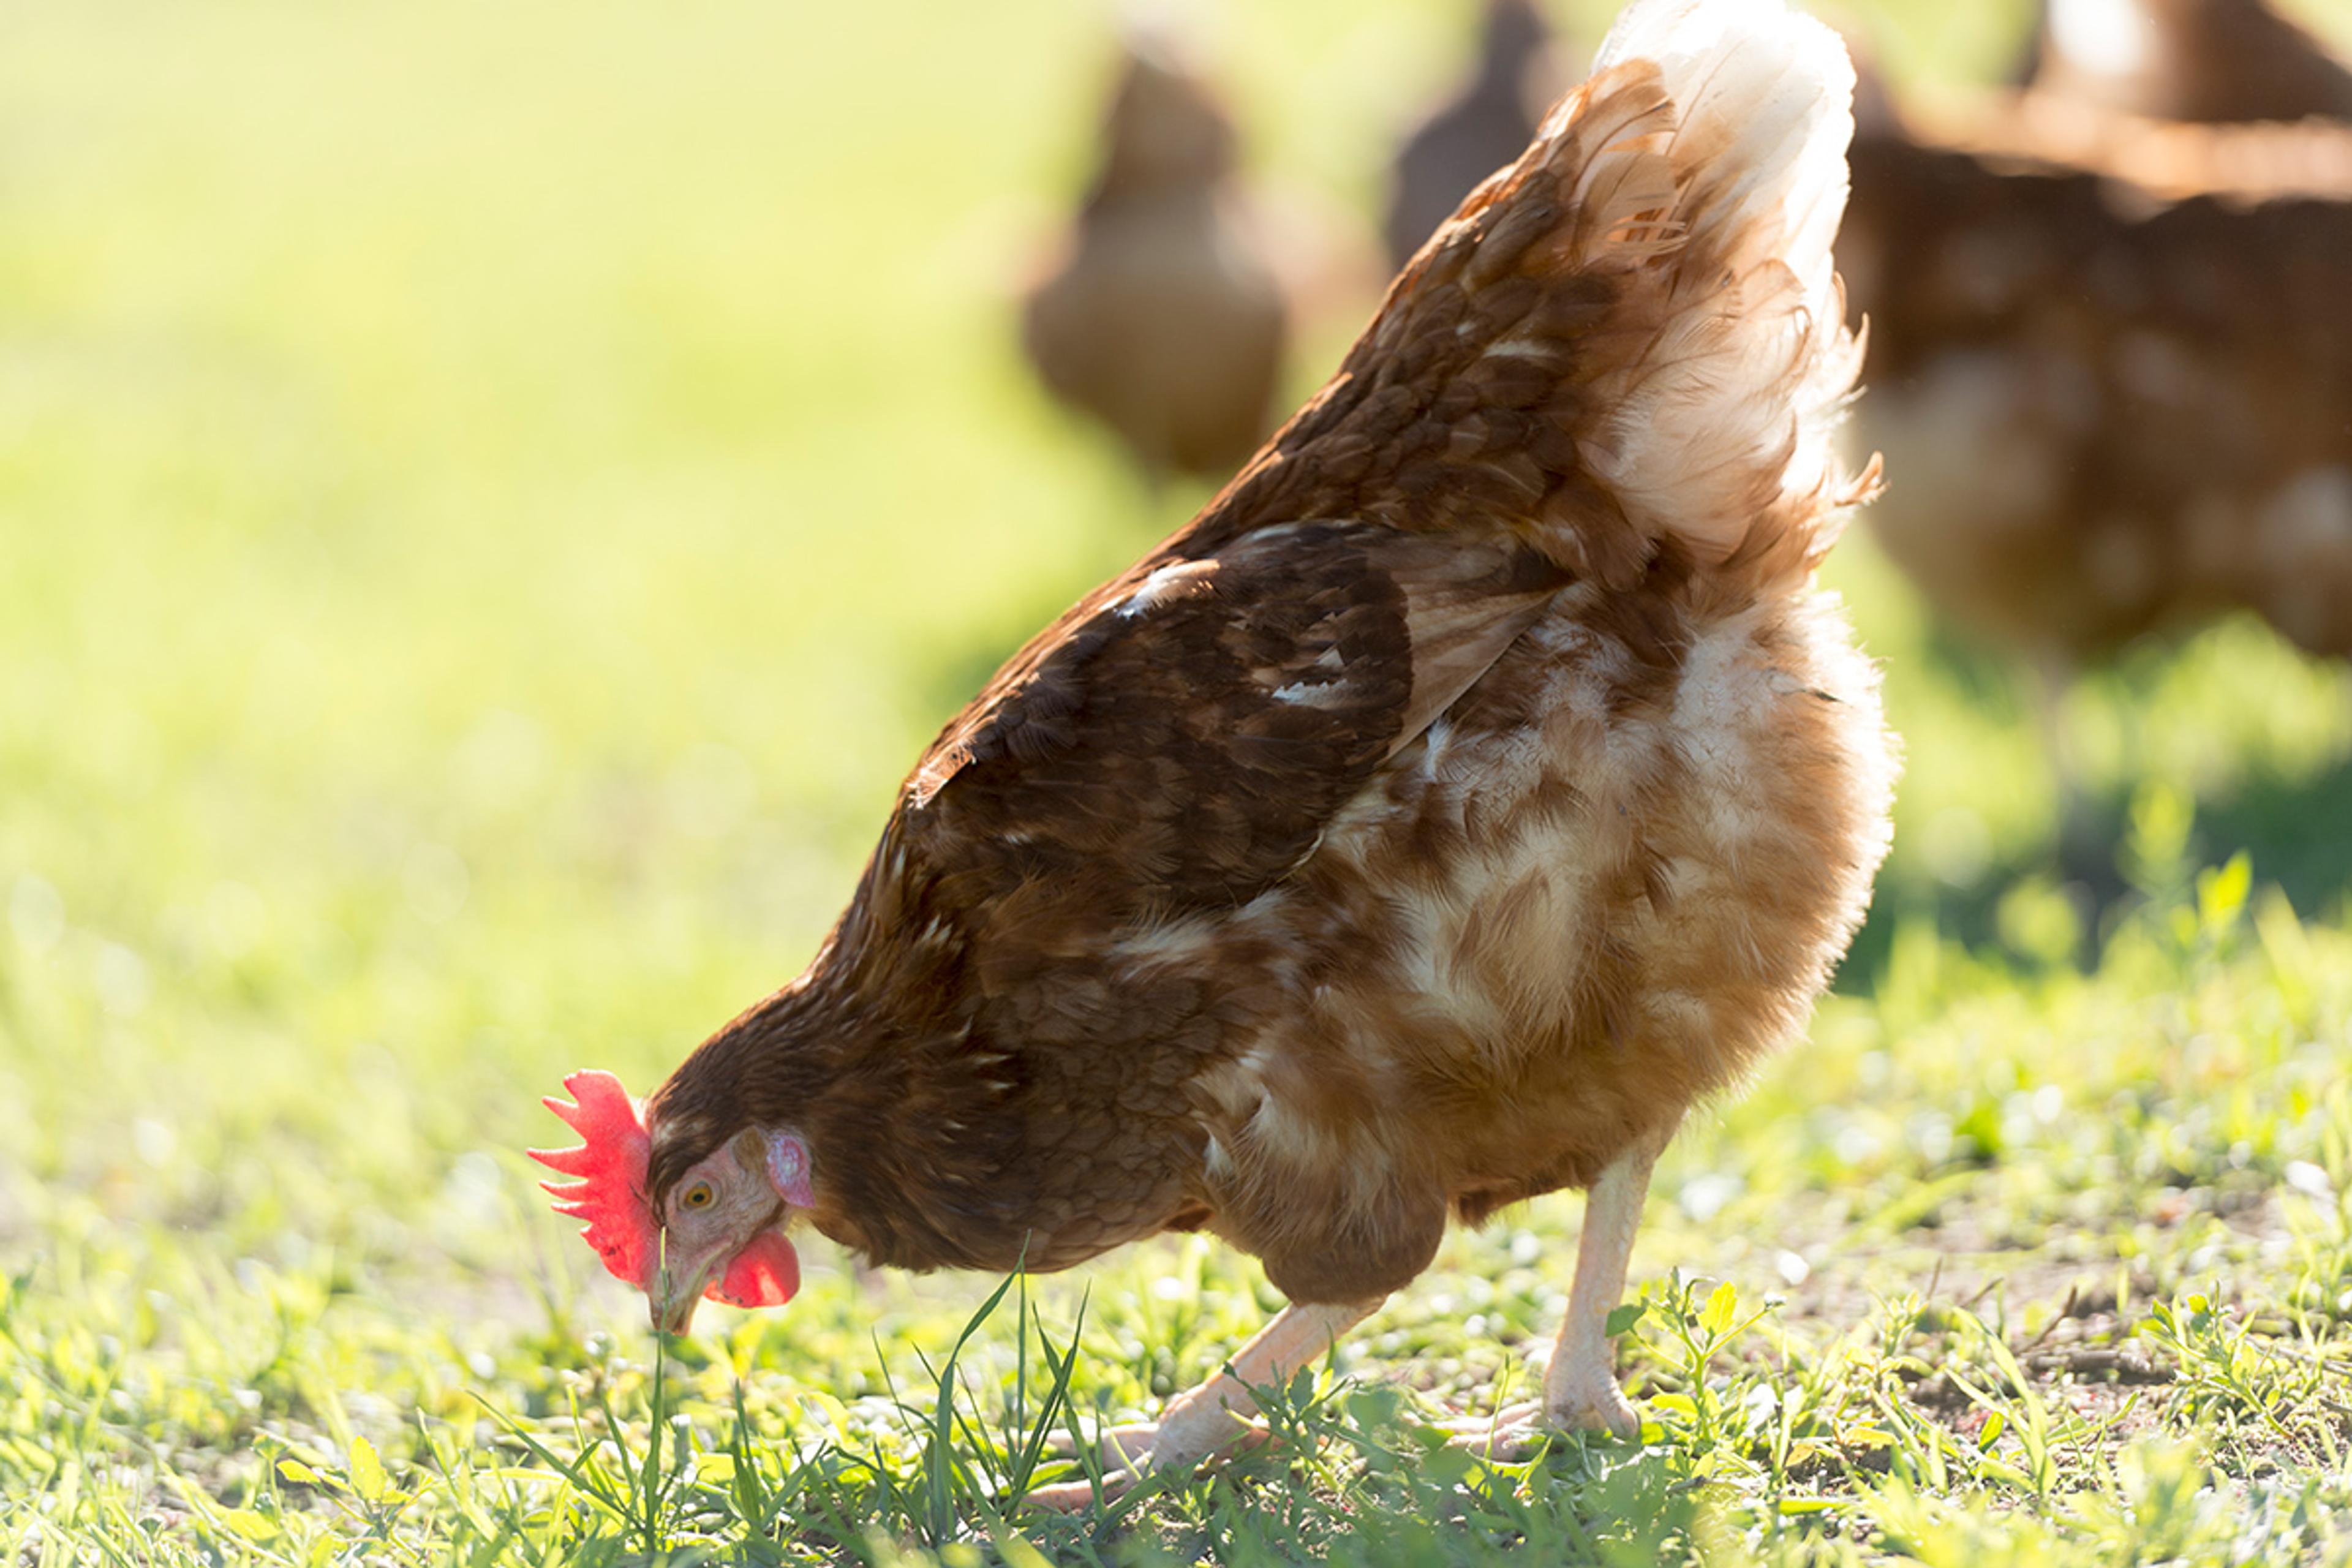 A brown hen pecks in the grass for bugs and other tasty treats on the Glick family’s Pennsylvania farm.